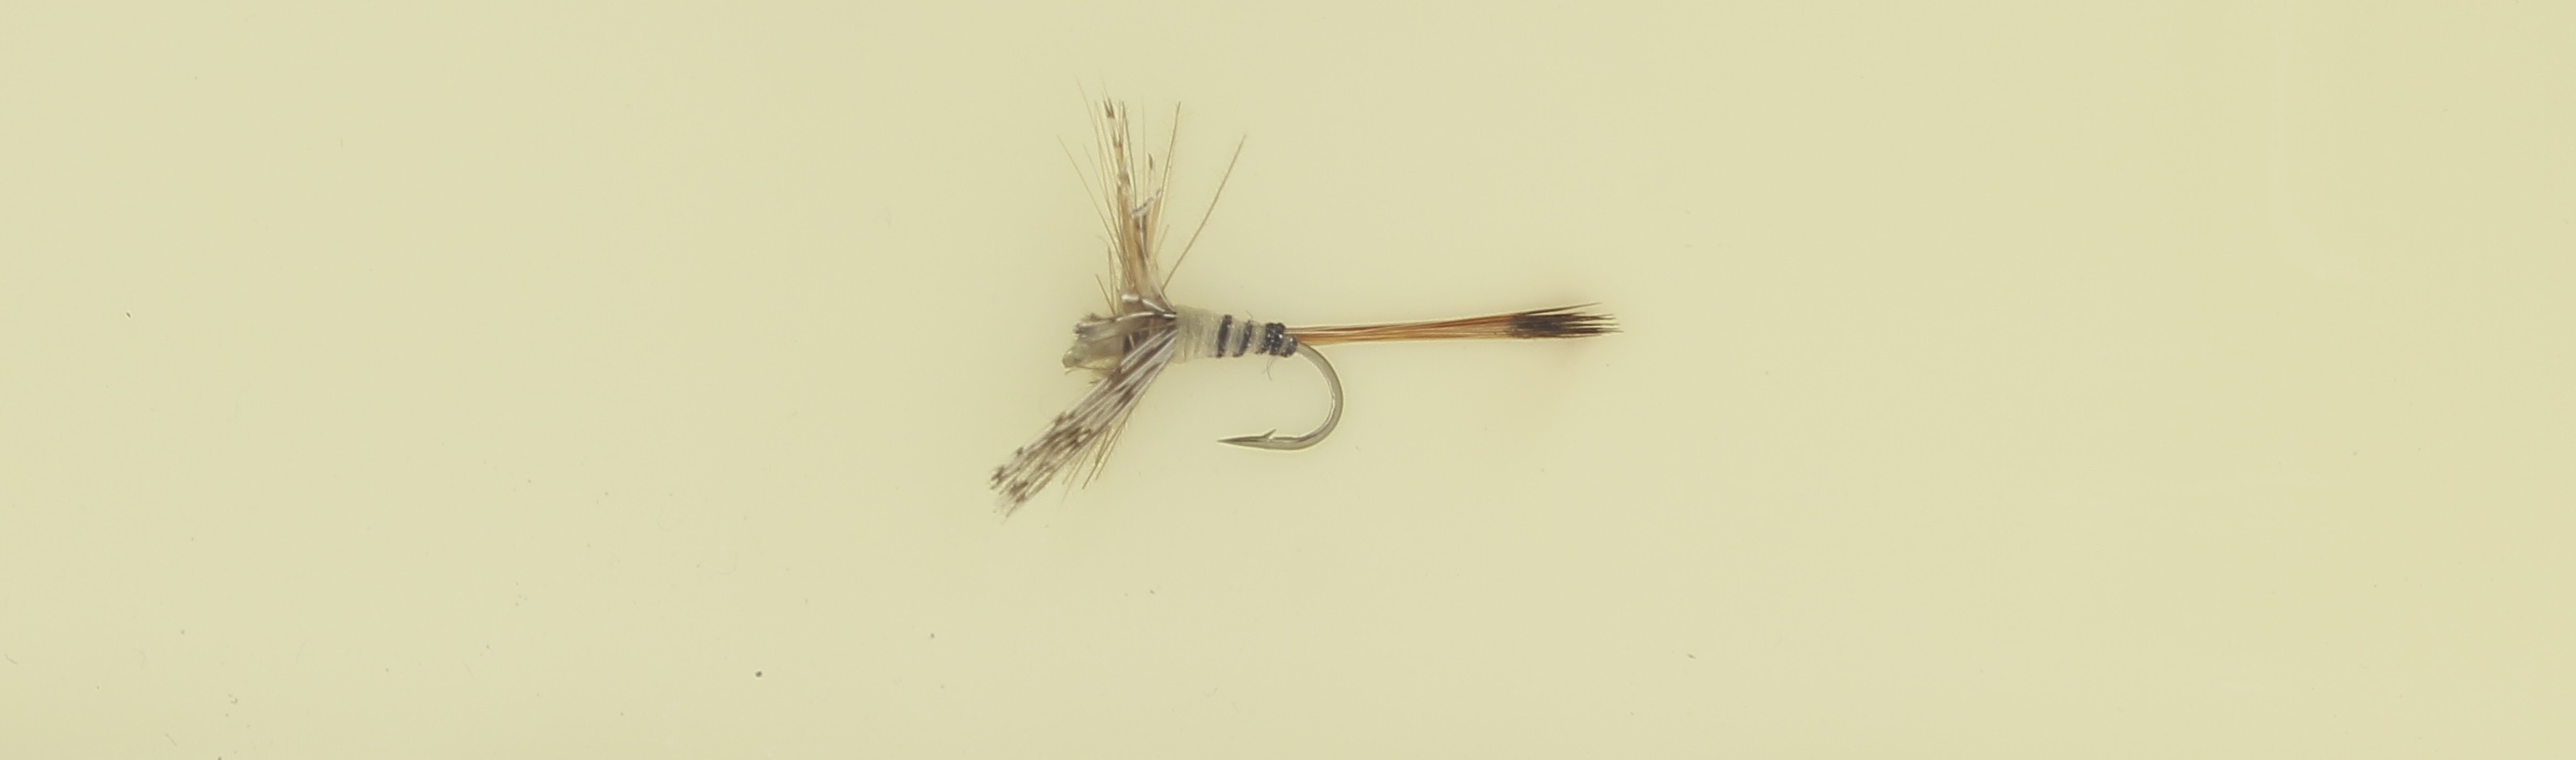 Inclusion, fly fishing